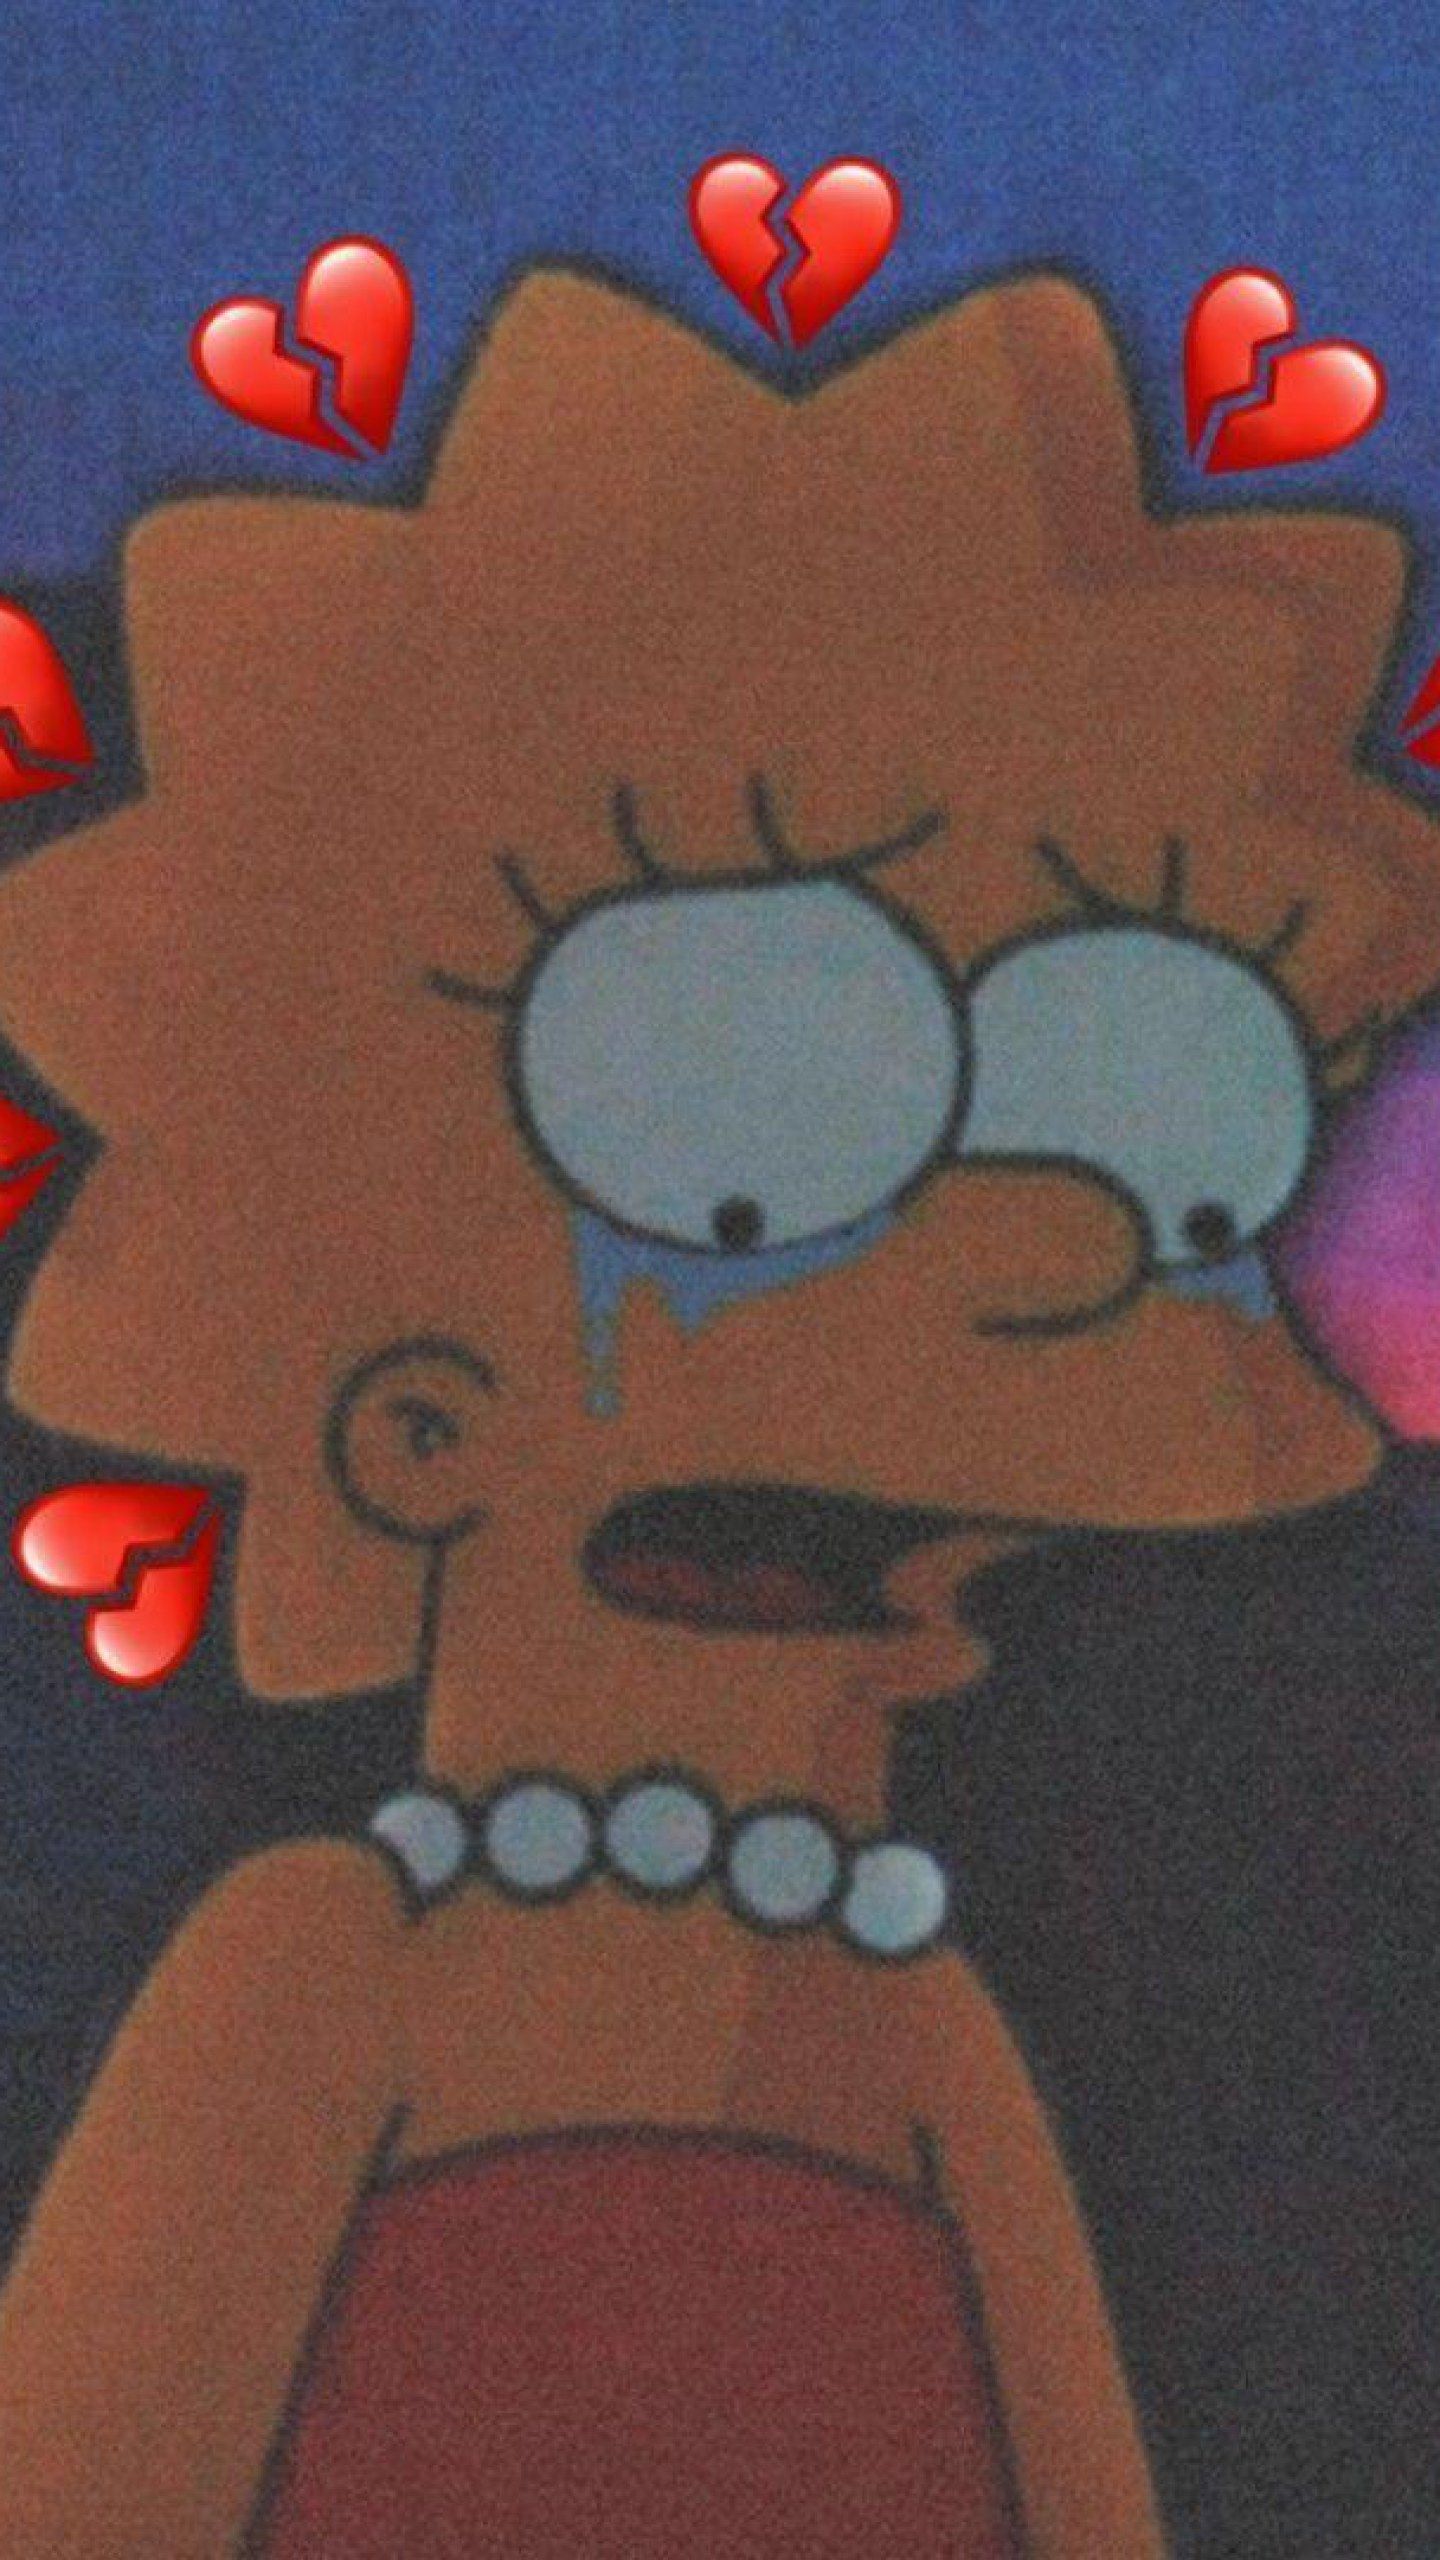 The simpsons with hearts around her head - Lisa Simpson